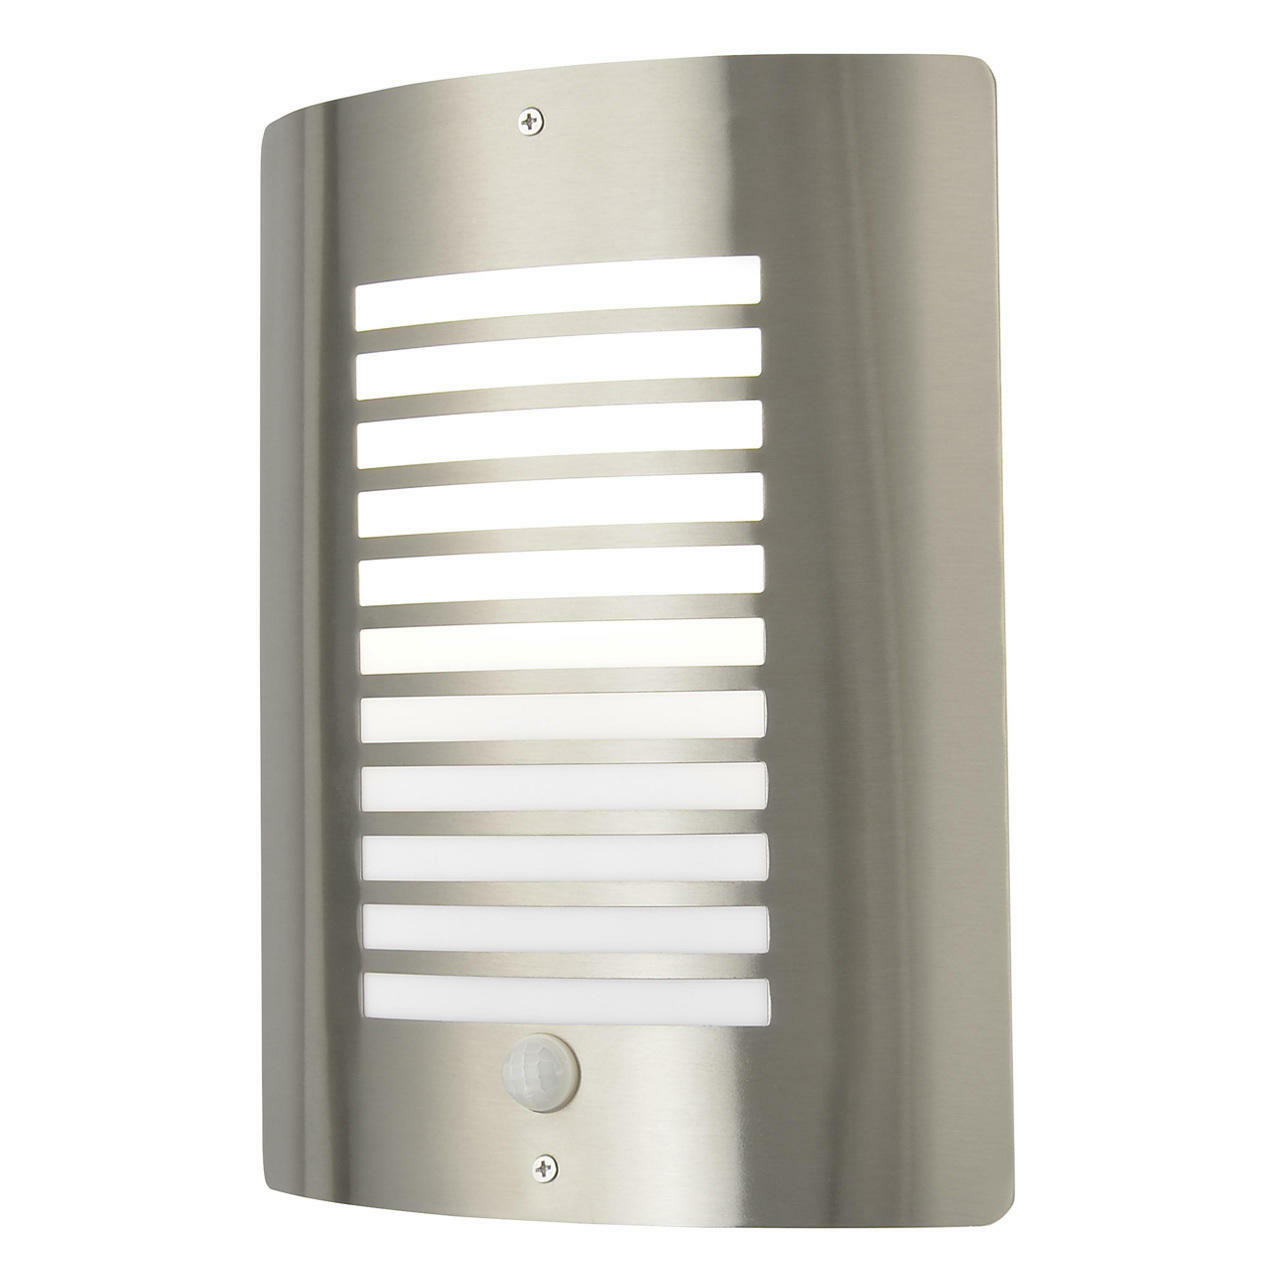 Photos - Chandelier / Lamp Zink SIGMA Outdoor Slatted Wall Lantern with PIR Stainless Steel ZN-28708